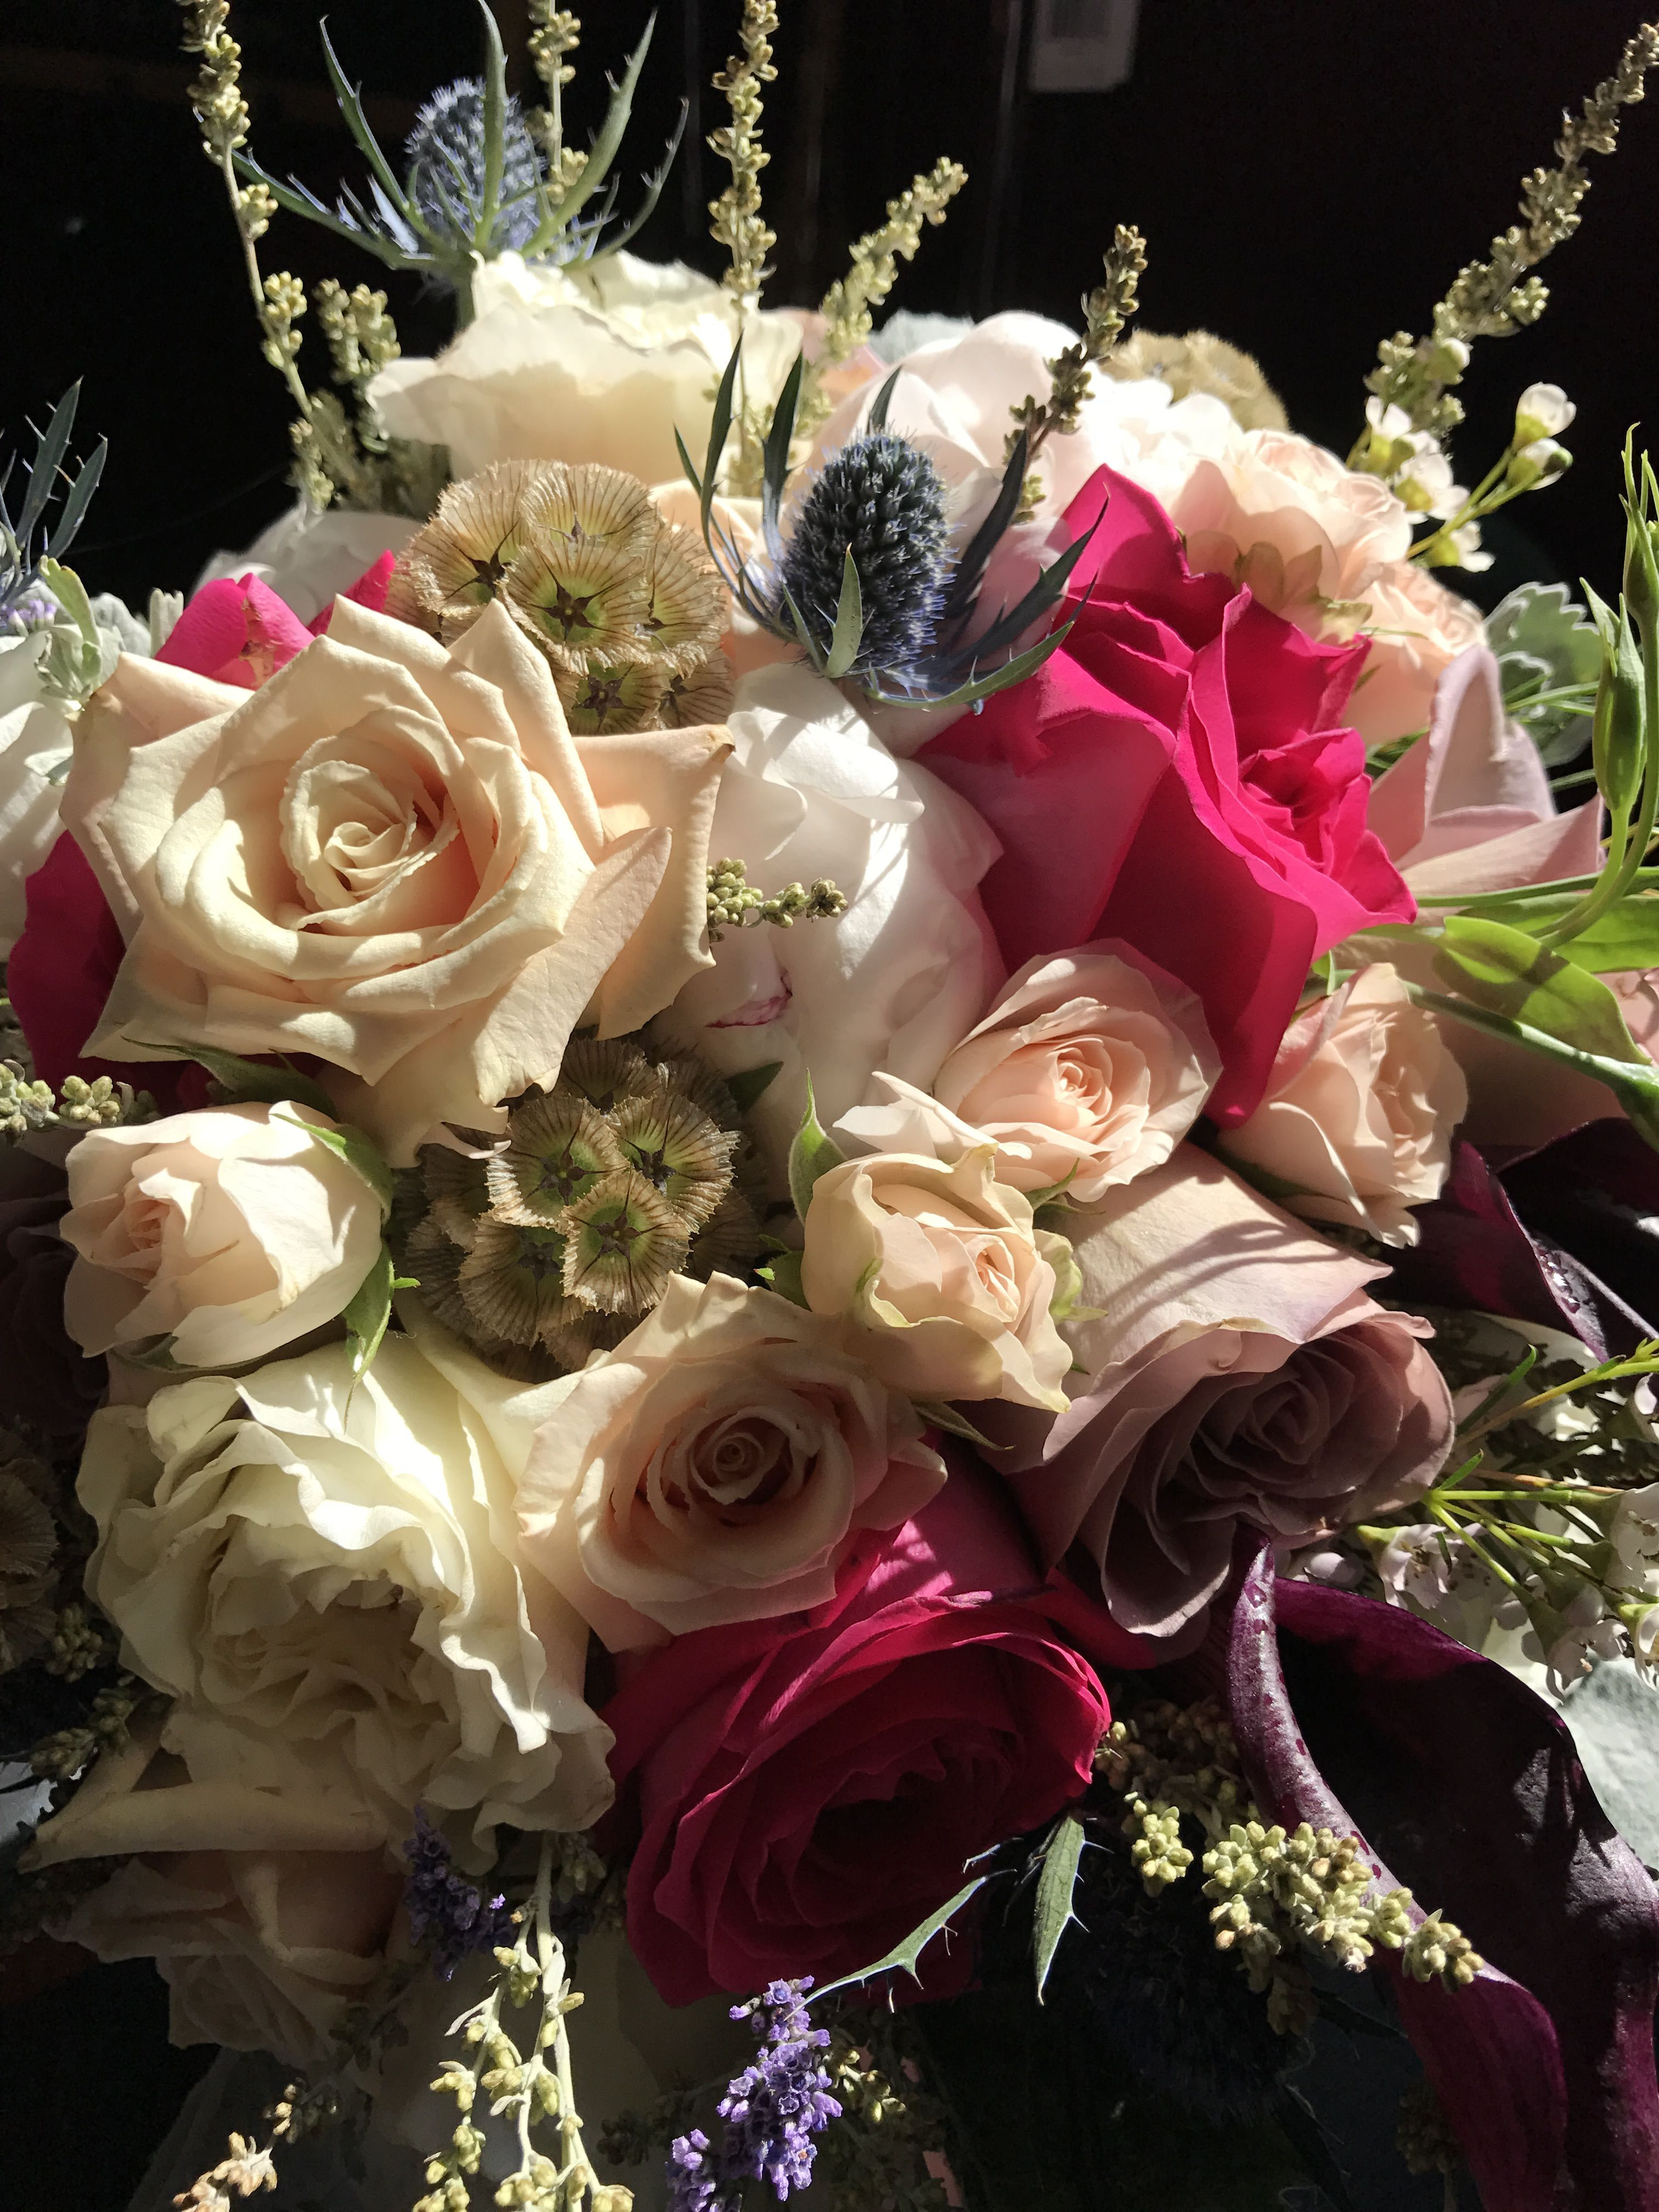 25 Amazing Crystal Vase Florist Austintown Ohio 2024 free download crystal vase florist austintown ohio of the willows by wehr in columbiana ohio wedding flowers in the willows by wehr in columbiana ohio wedding flowers thewillowsbywehr wedding flowers